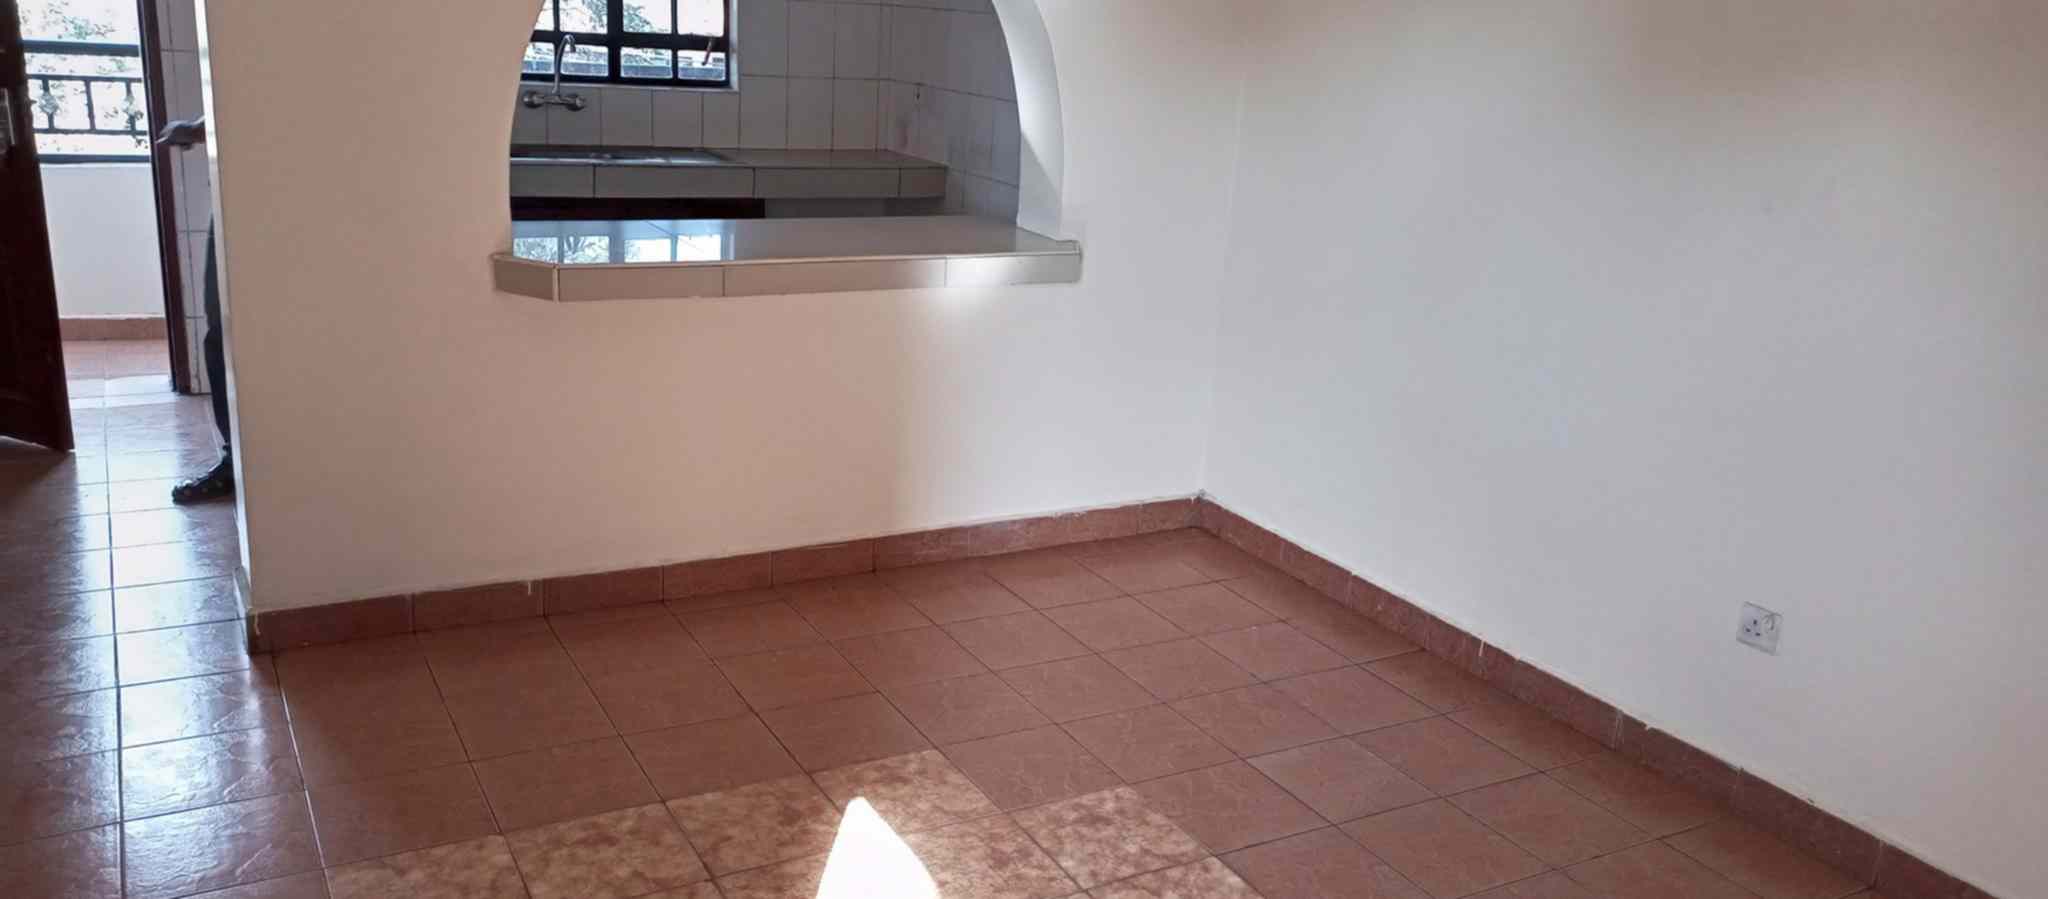 1 bedroom apartment for rent in Ngara